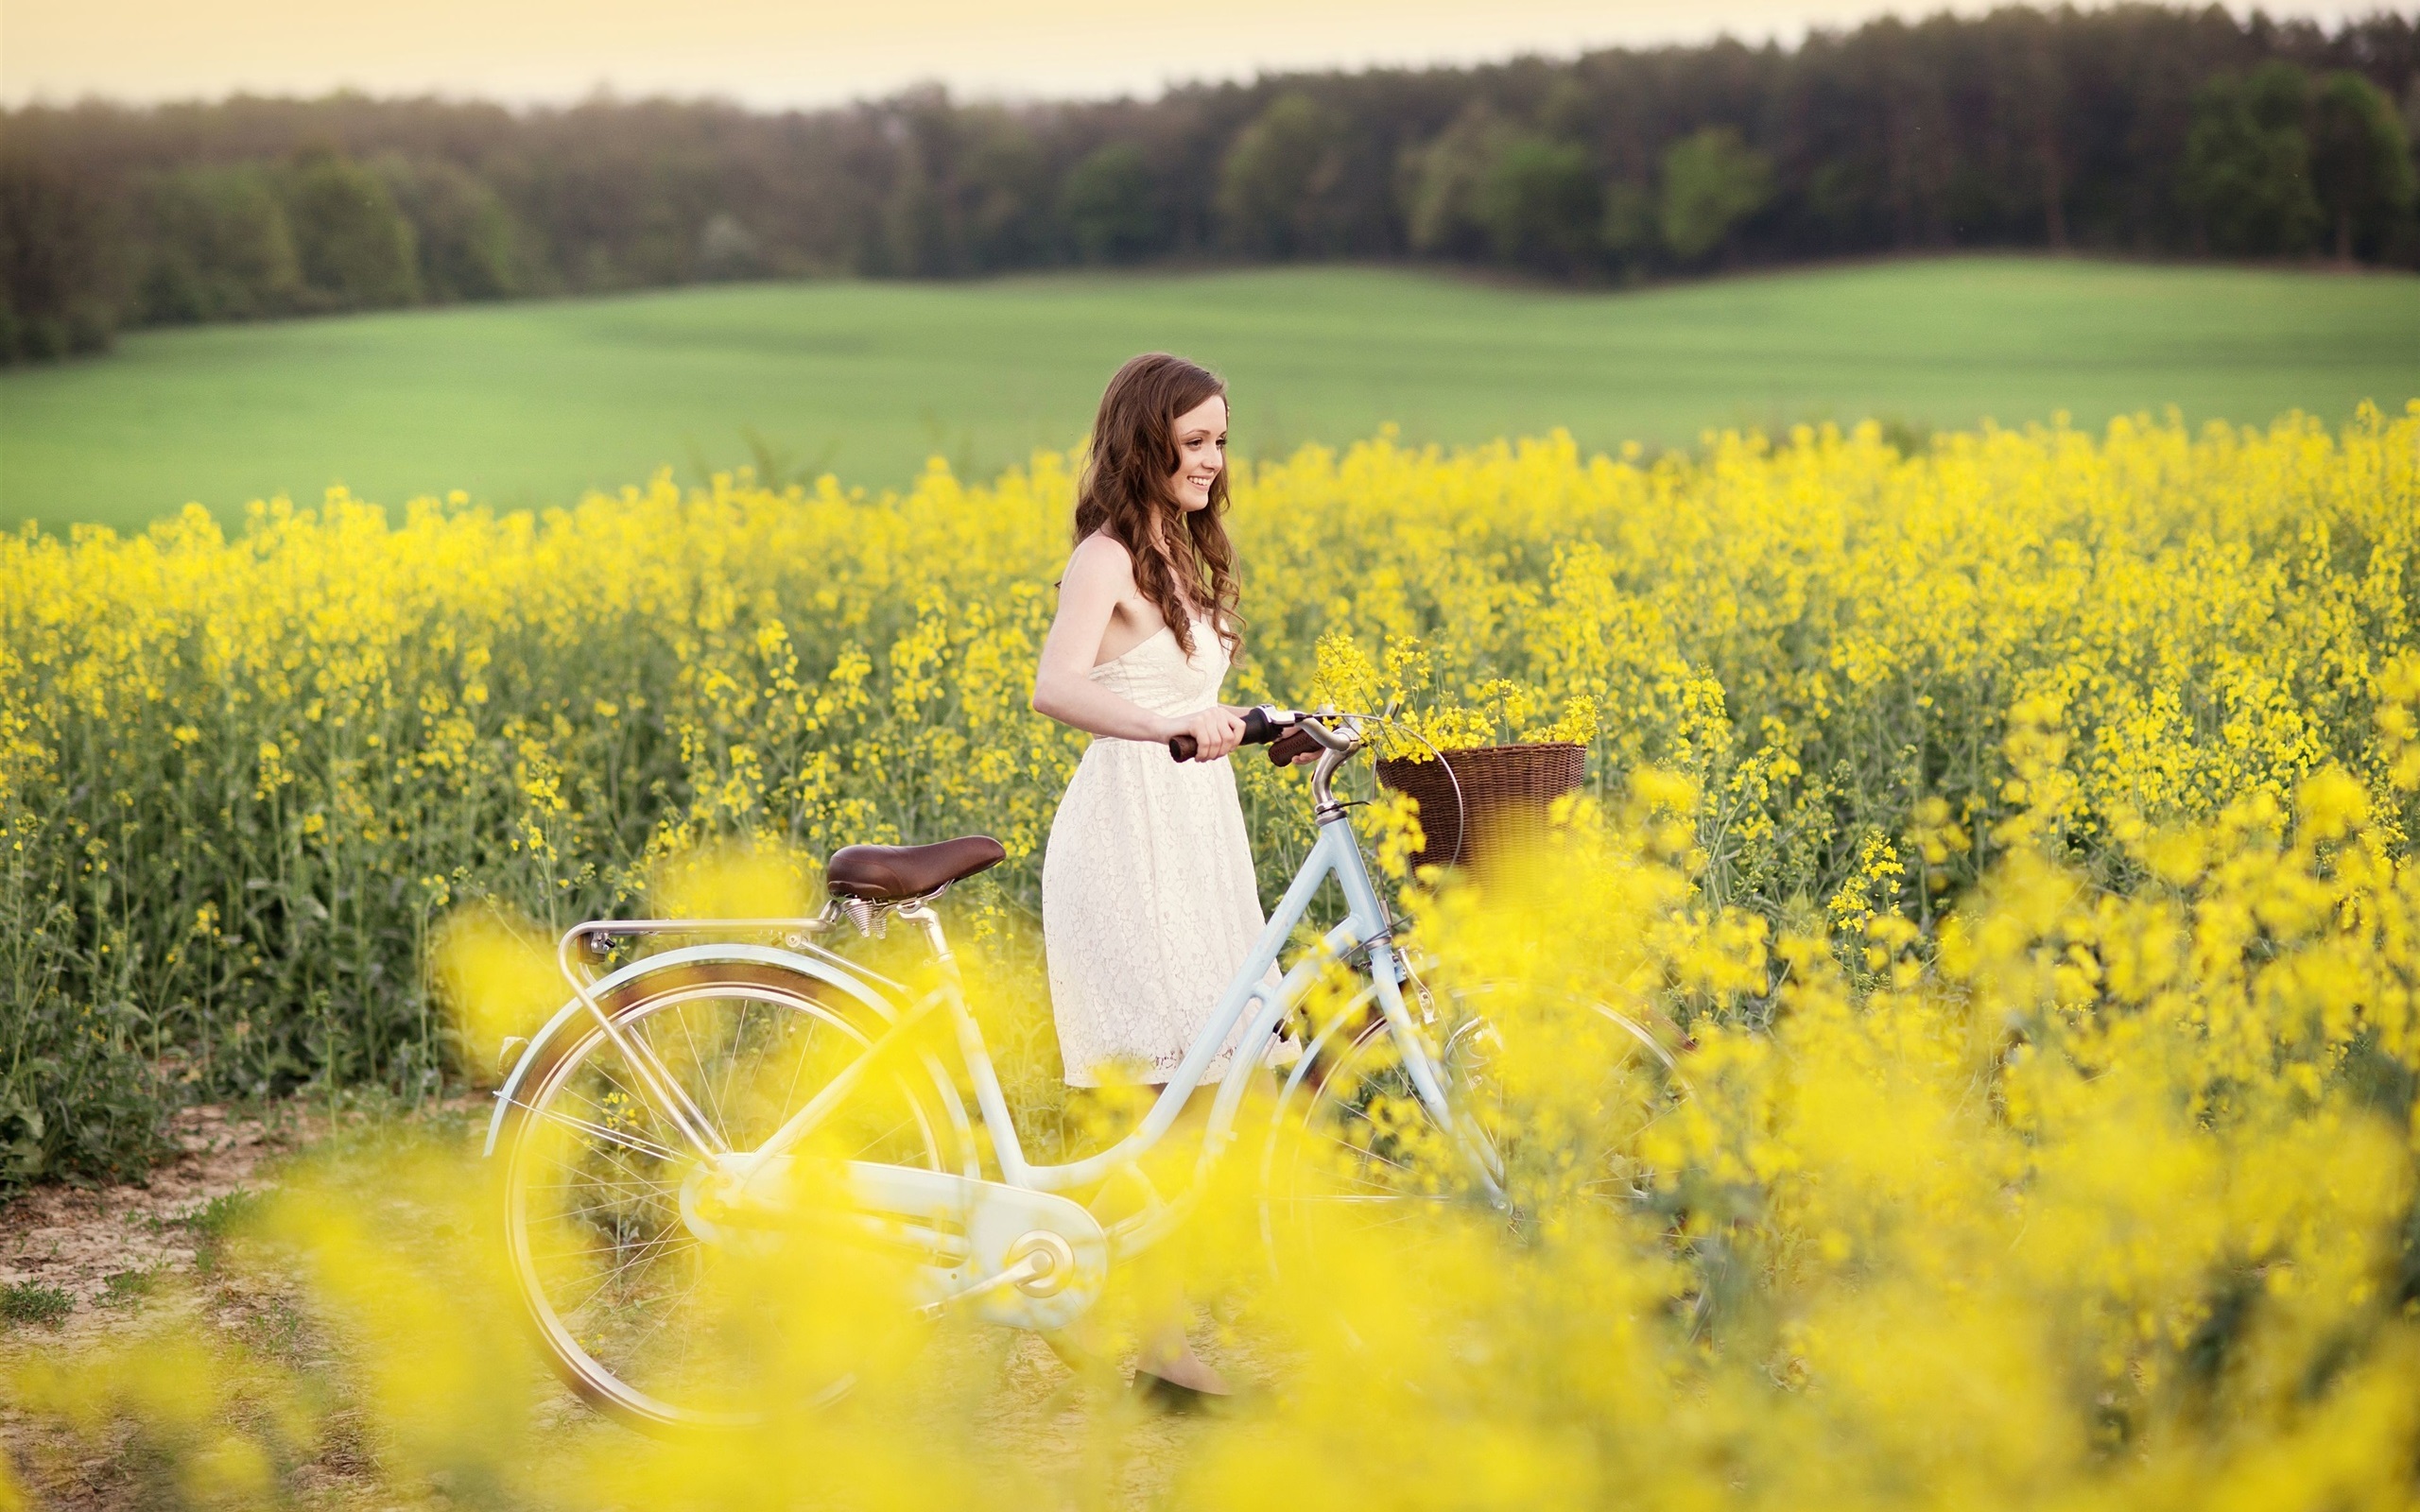 smile girl wallpaper,rapeseed,people in nature,canola,yellow,mustard plant